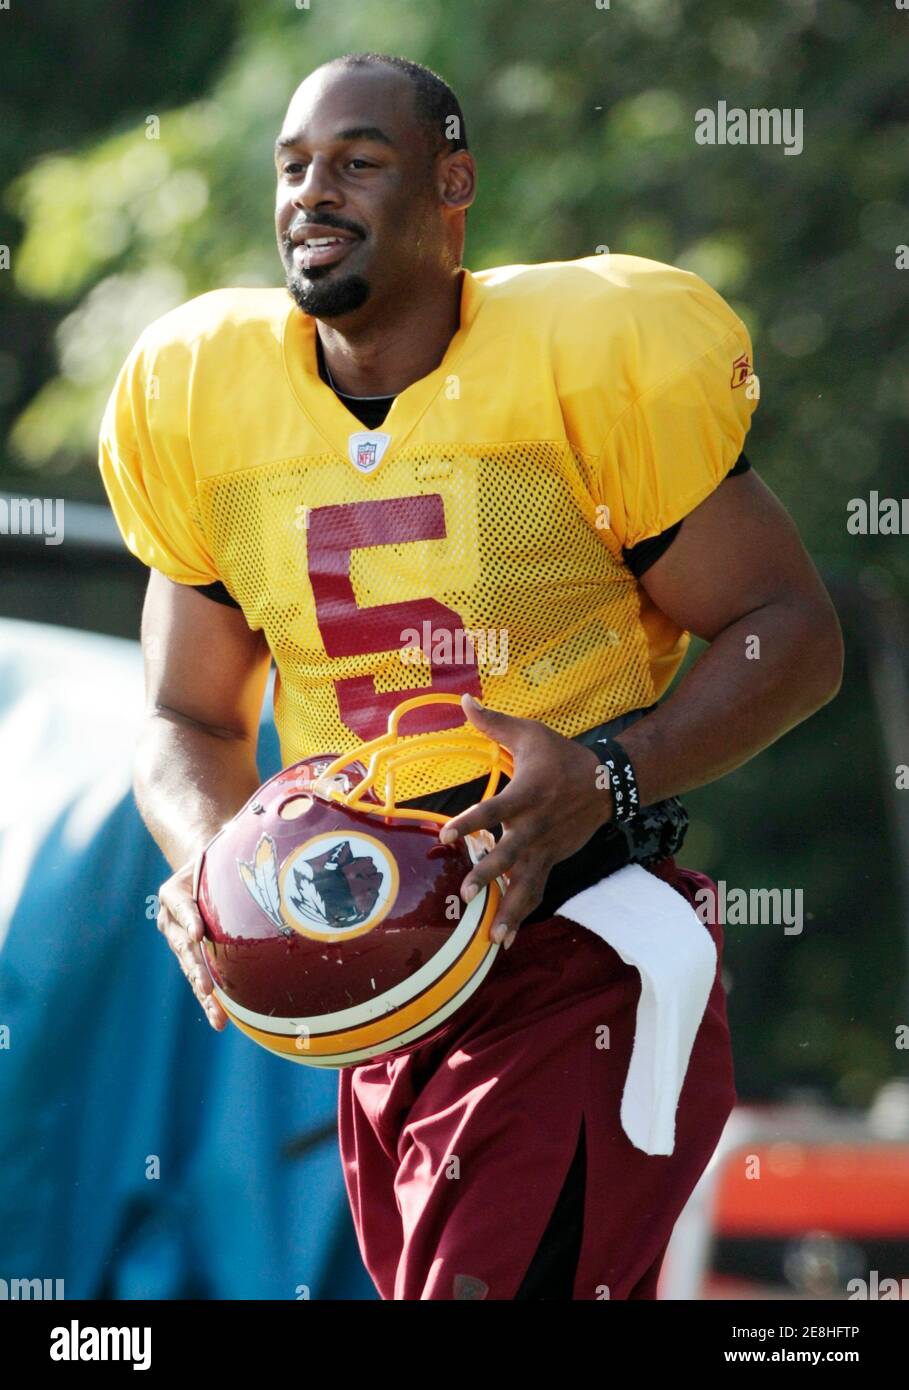 Washington Redskins starting quarterback Donovan McNabb, formerly of the Philadelphia Eagles, jogs with his new team during the second day of their NFL football training camp in Ashburn, Virginia July 30, 2010.                     REUTERS/Gary Cameron (UNITED STATES - Tags: SPORT FOOTBALL) Stock Photo